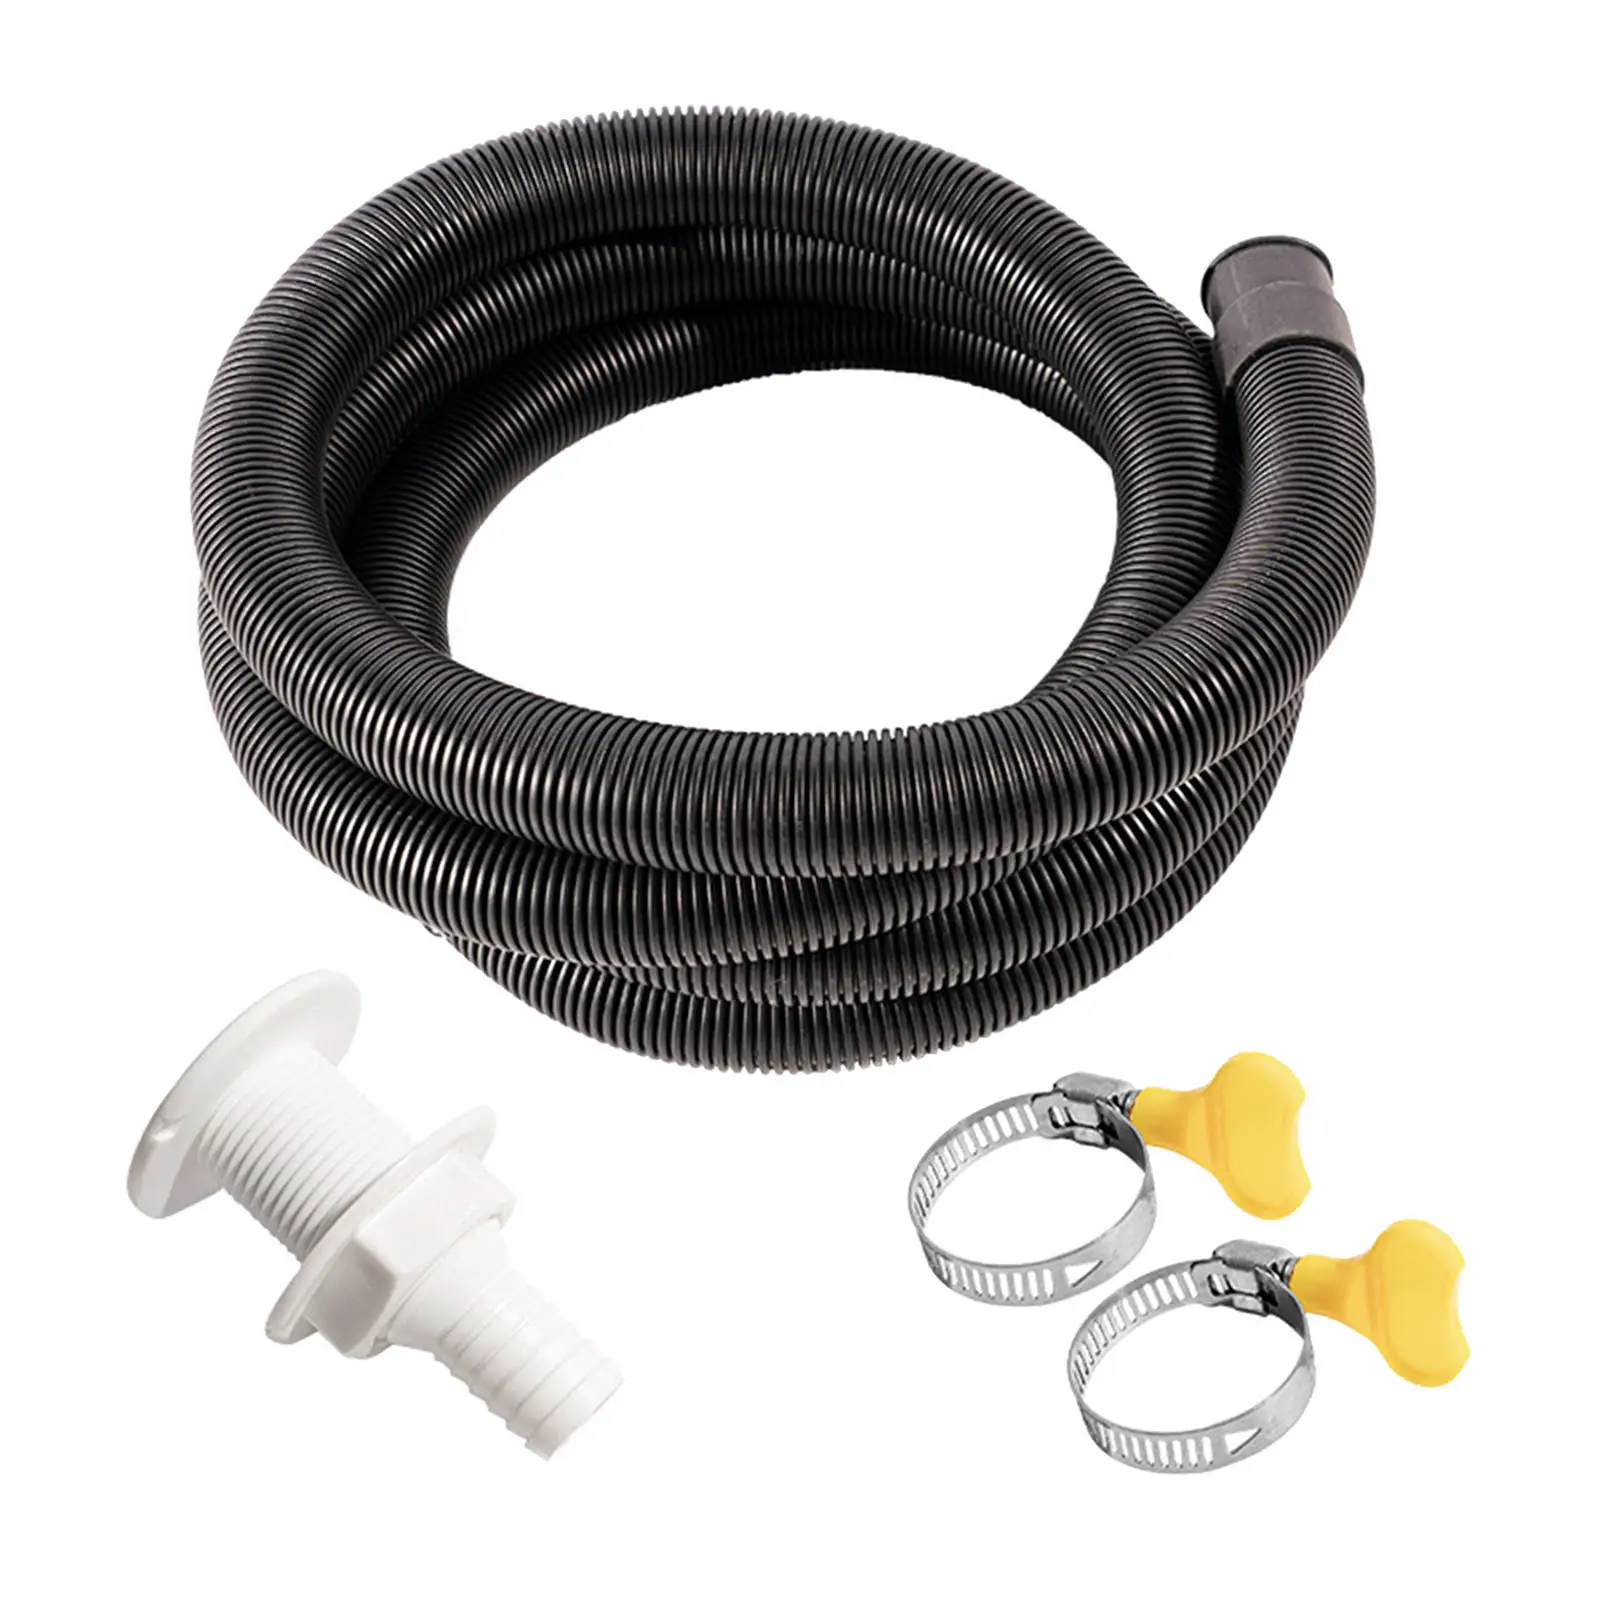 Marine Bilge Pump Plumbing Kit 6.6 FT with 2 Clamps and Thru-Hull Fitting